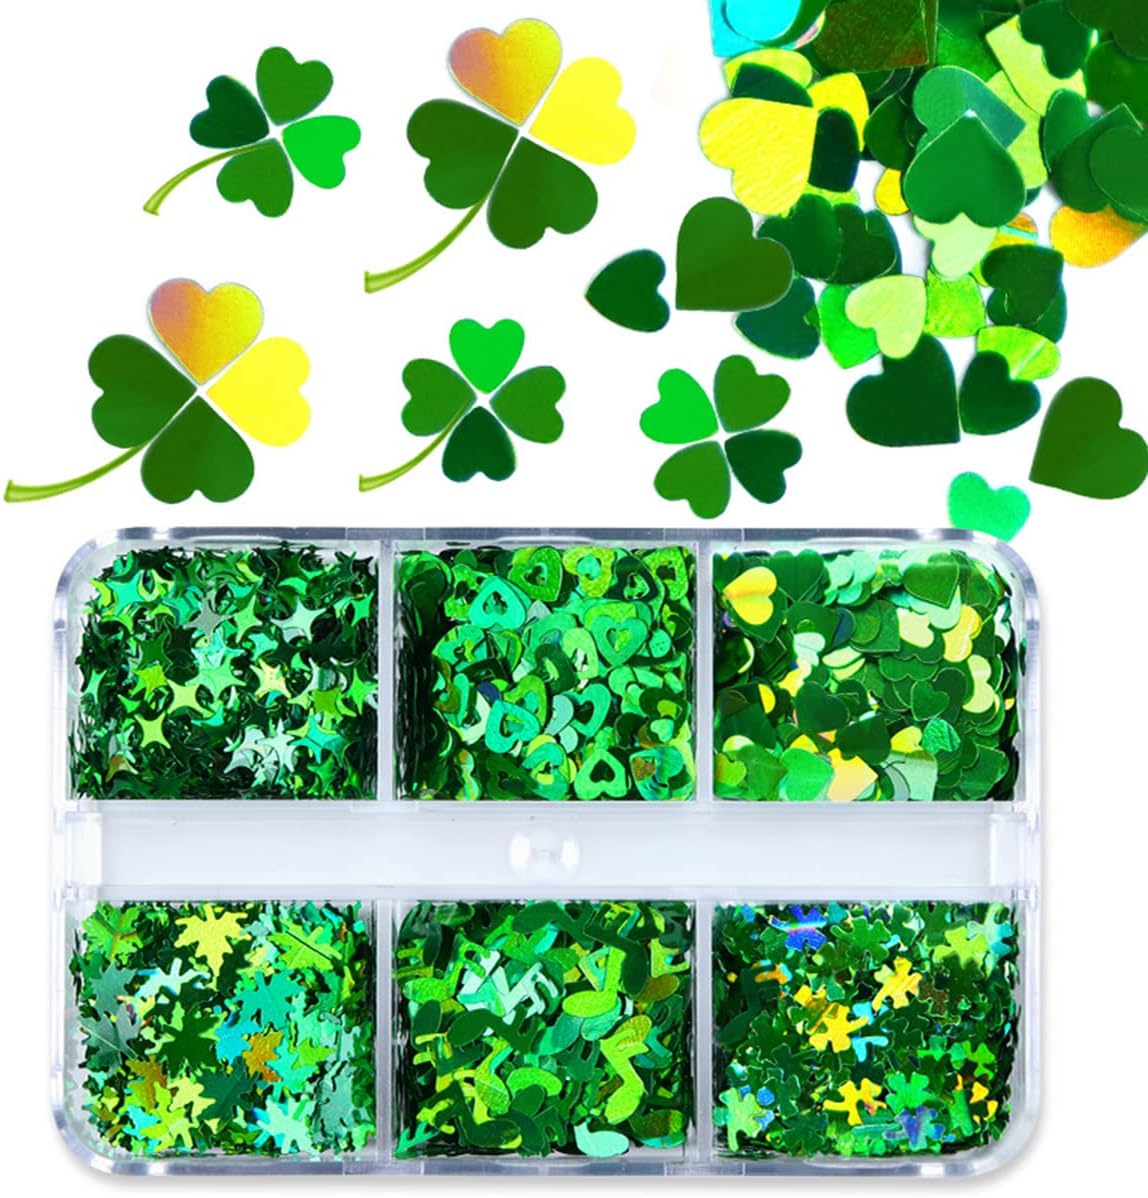 6 Grids of Holographic Sequins - #29 St Patrick's Day